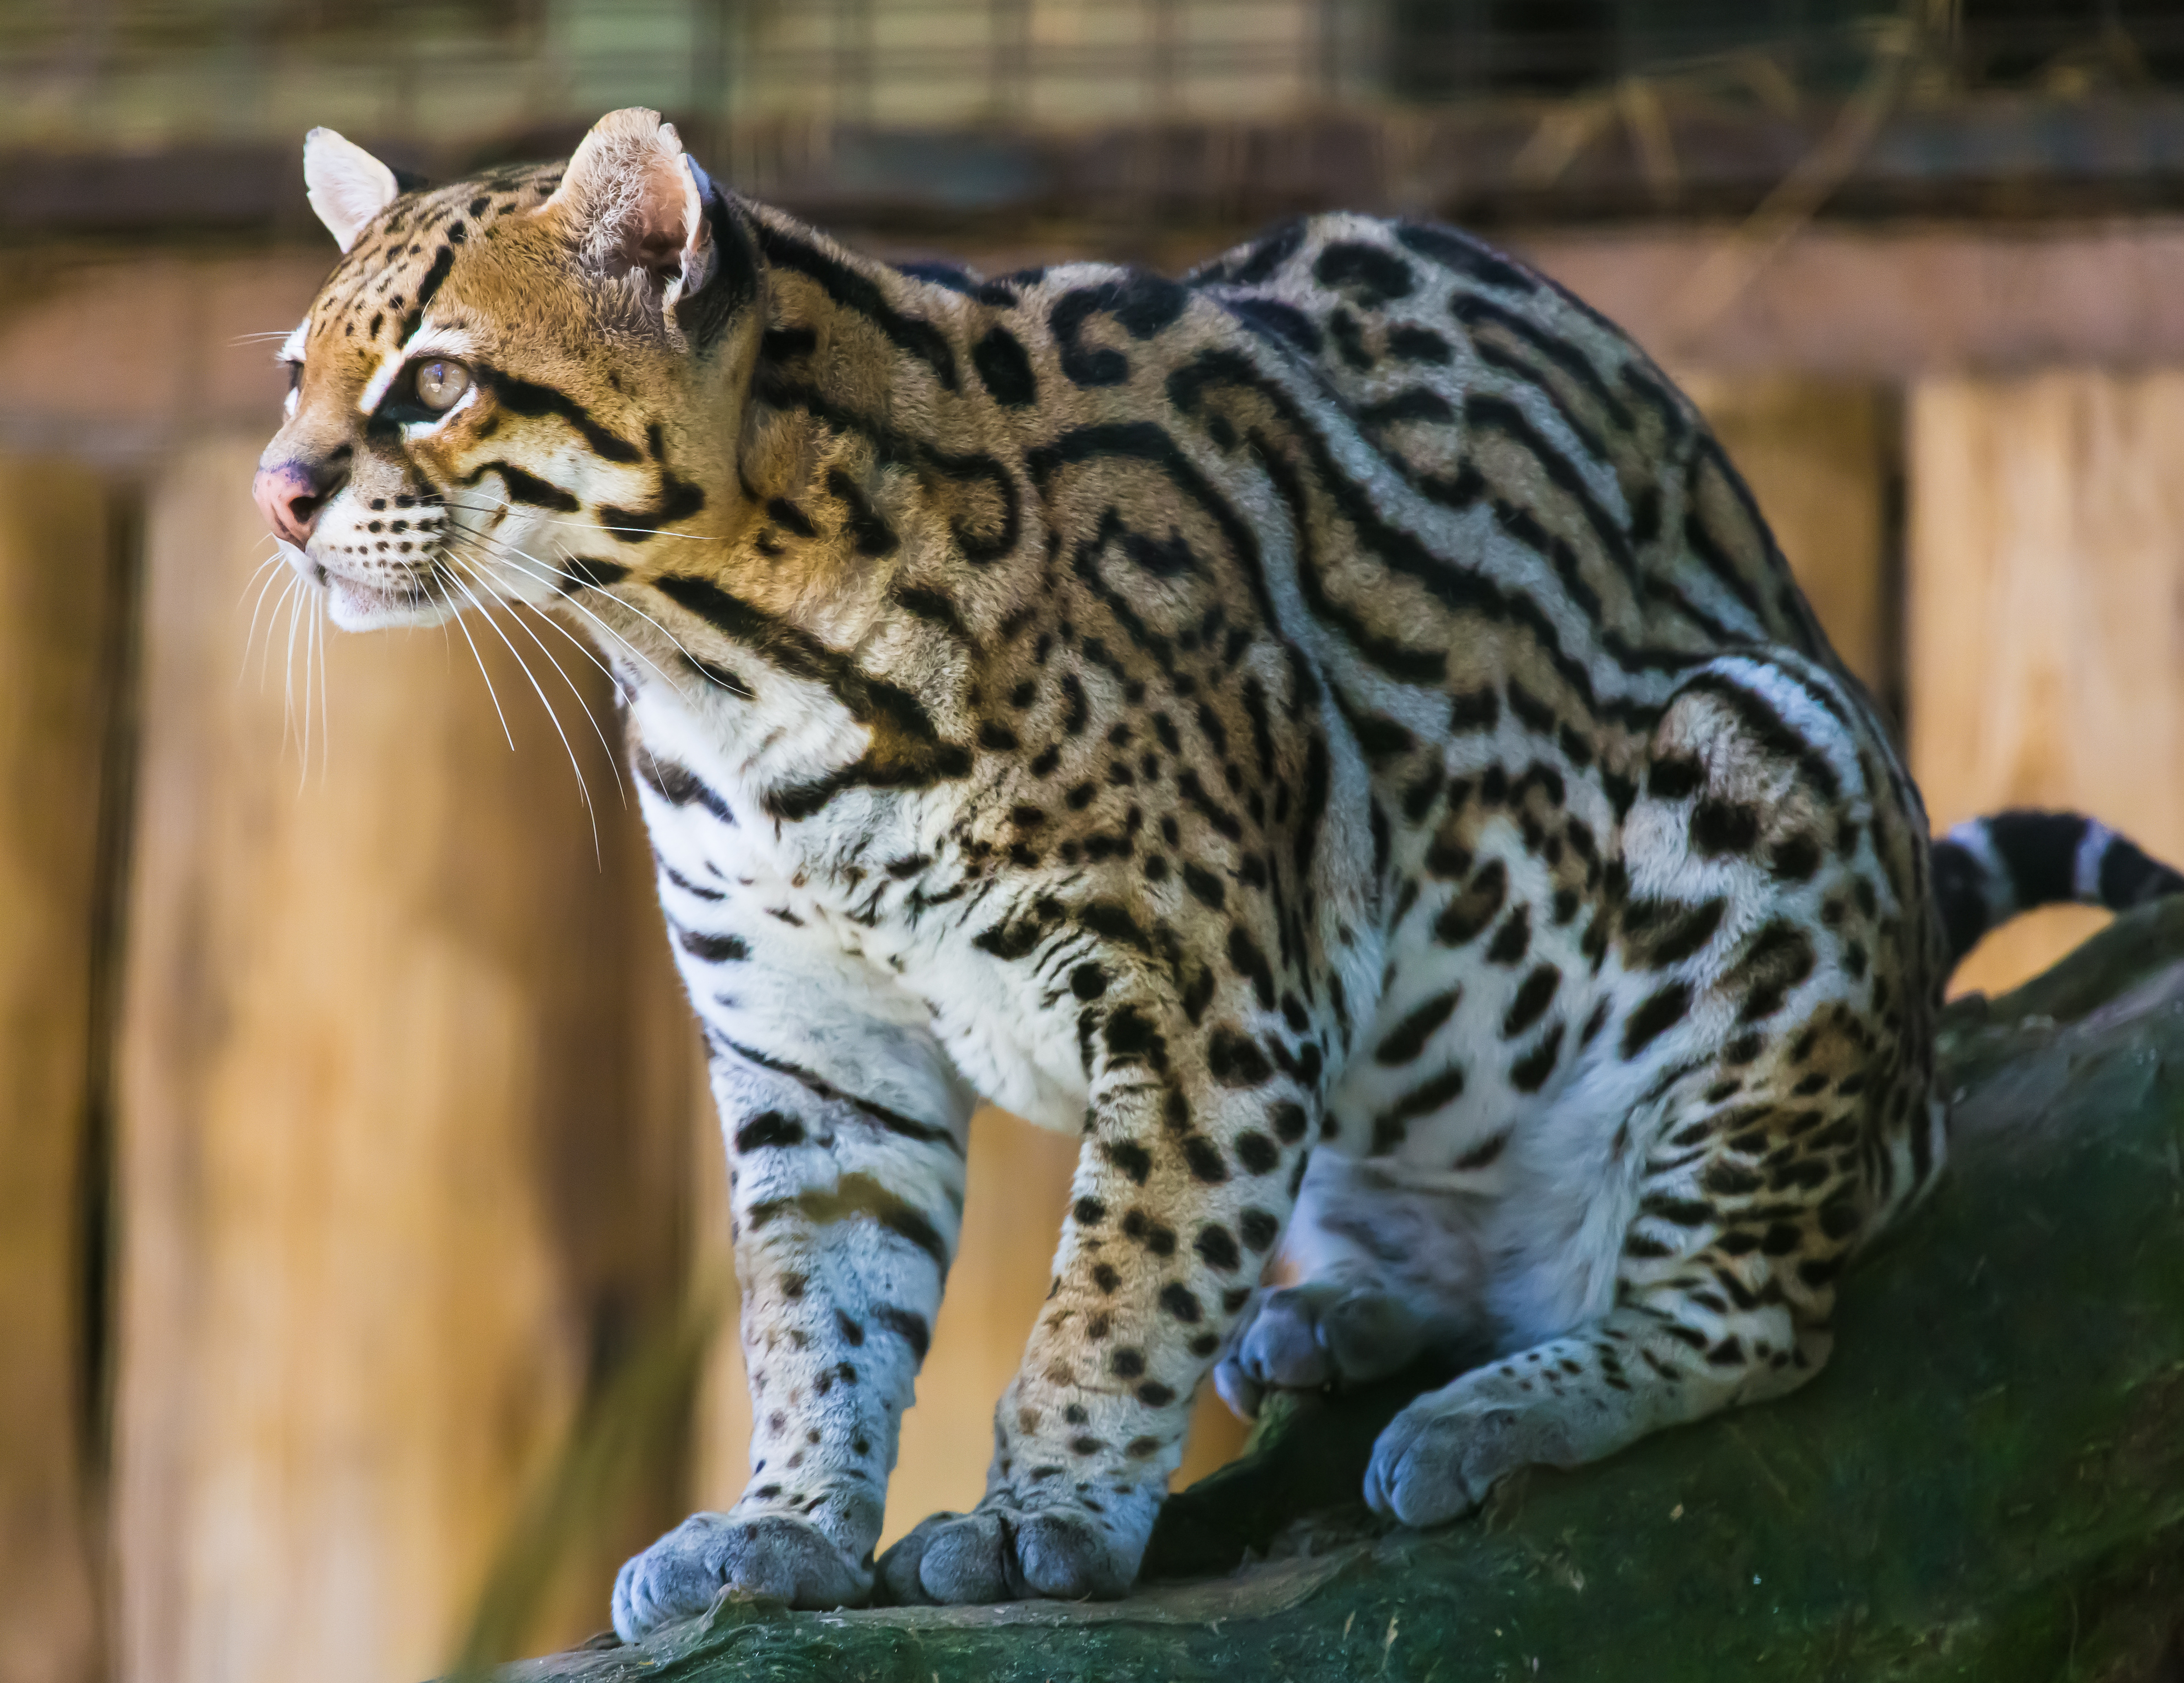 How many species of ocelots are there?